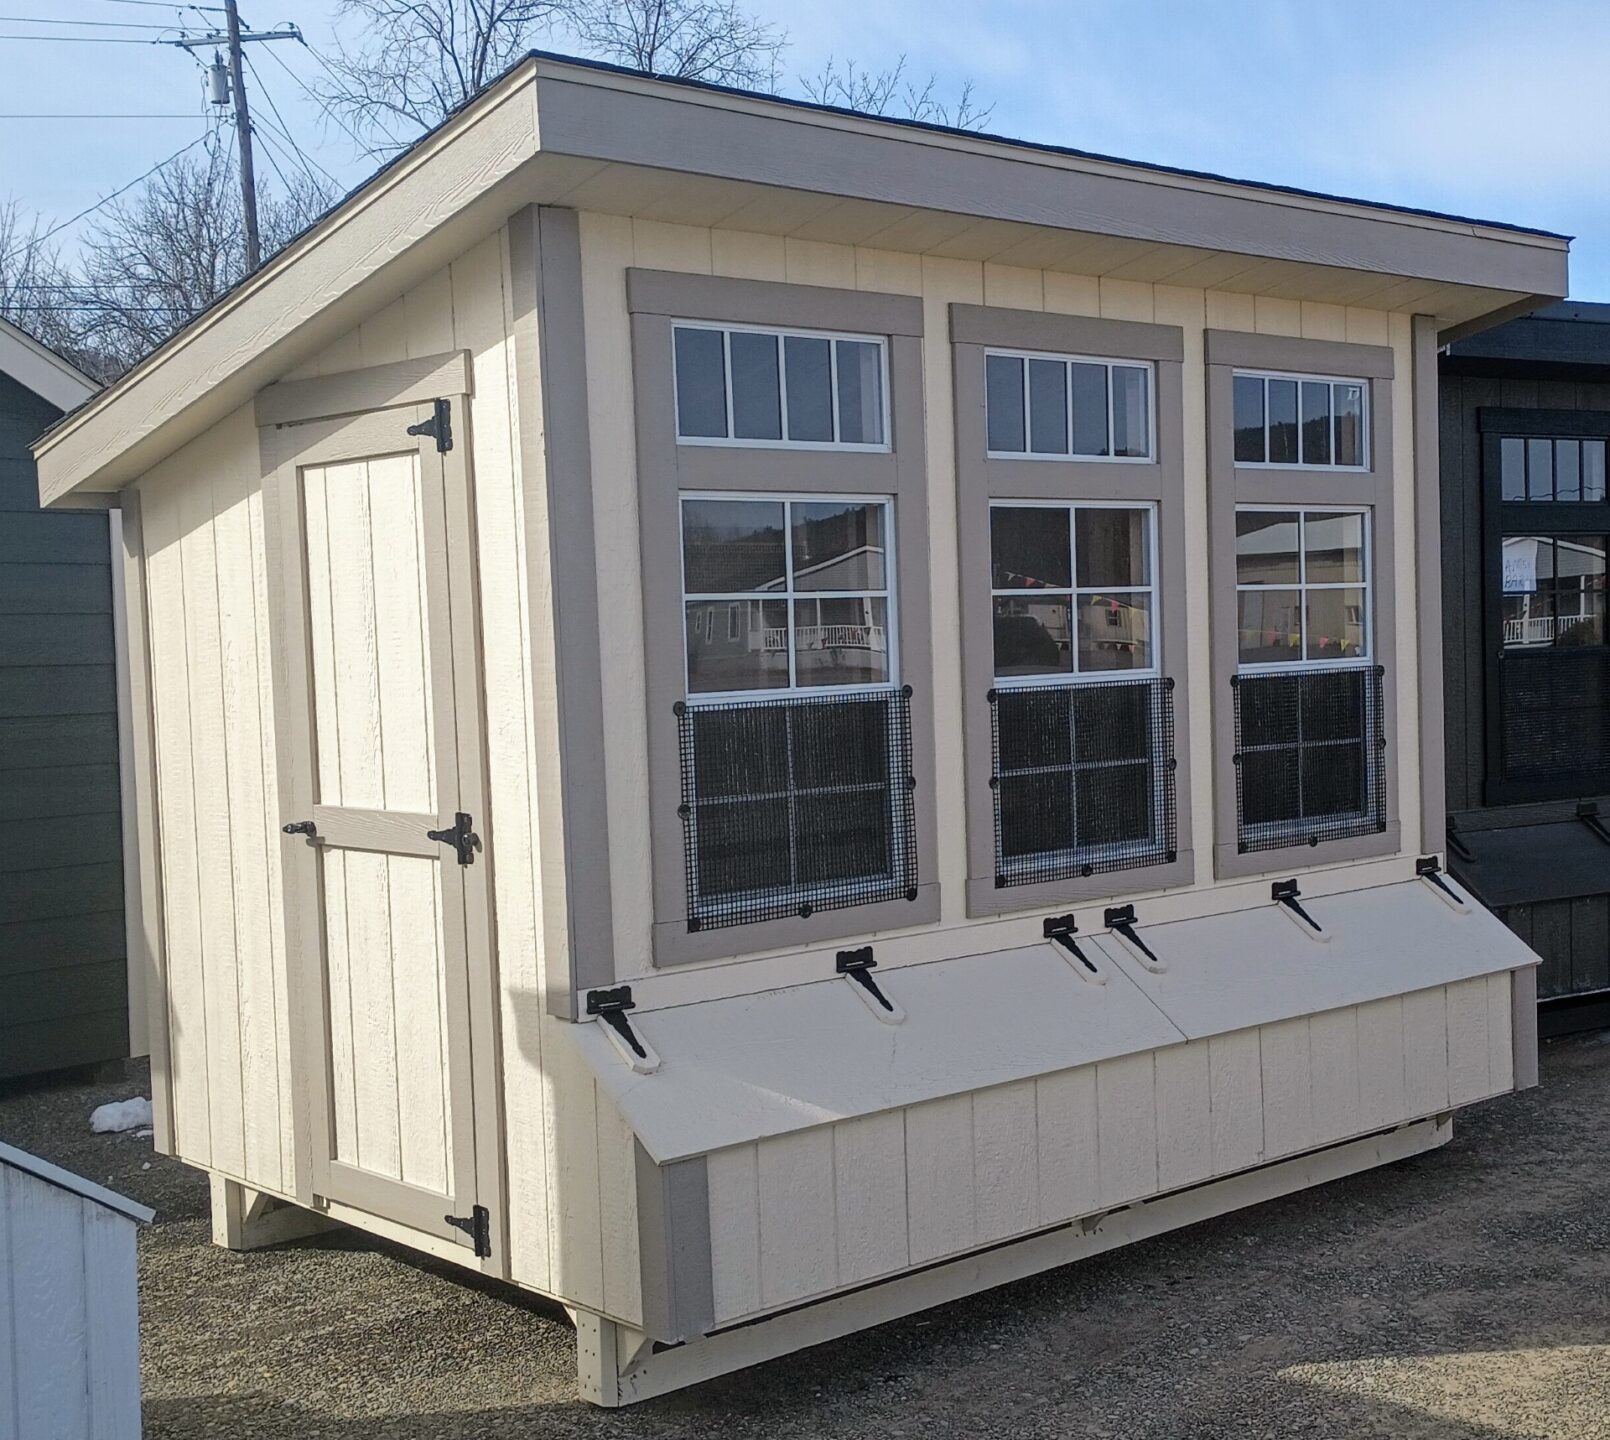 Lean to coop with side door, 3 windows and nesting boxes below